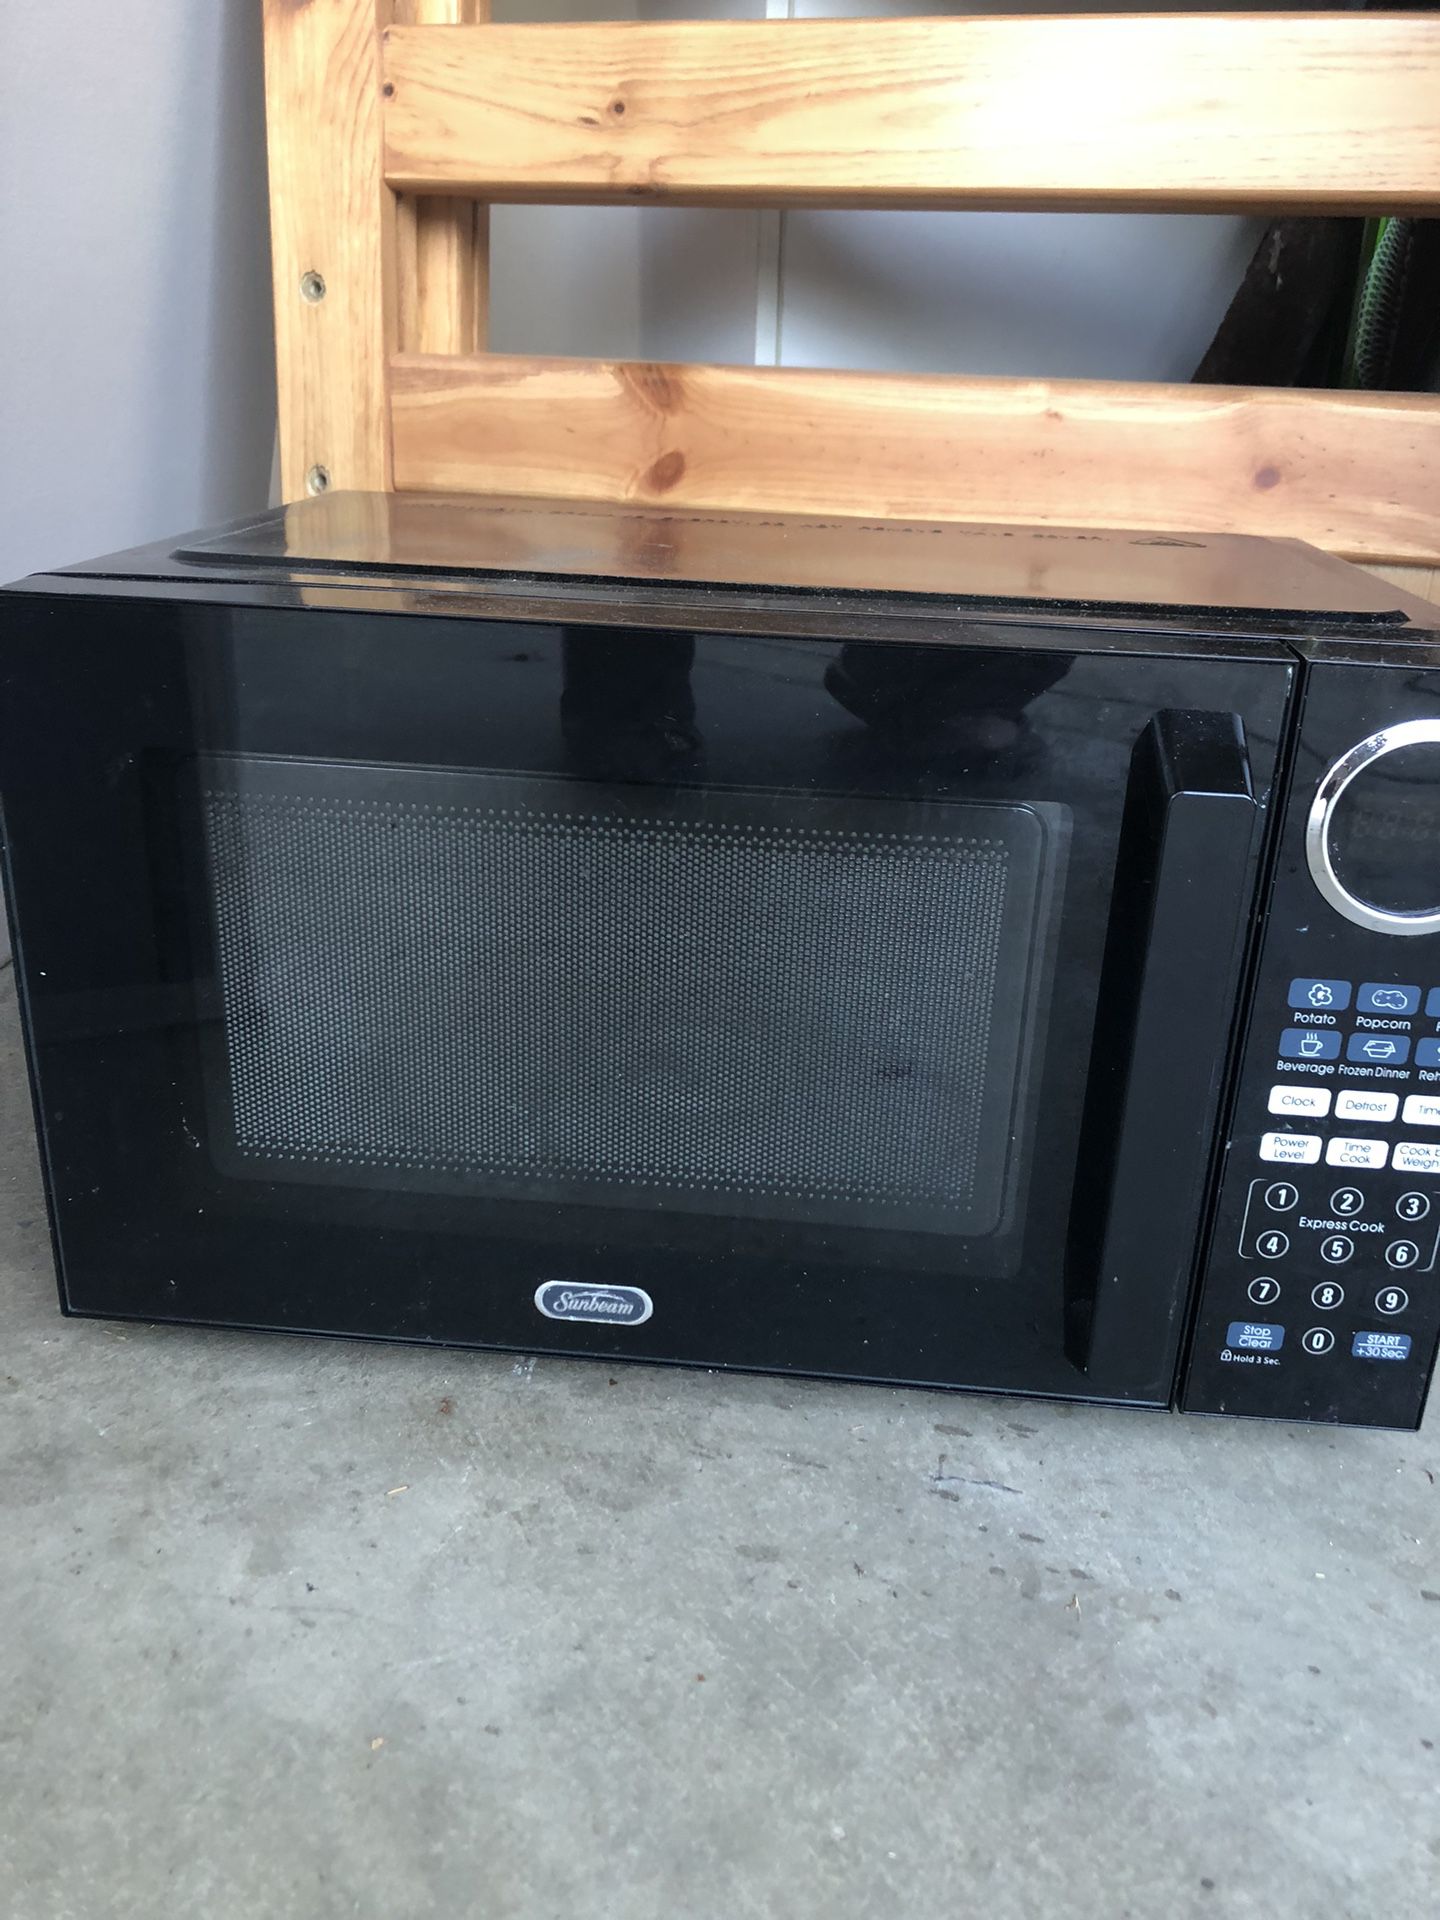 Used microwave in good condition!